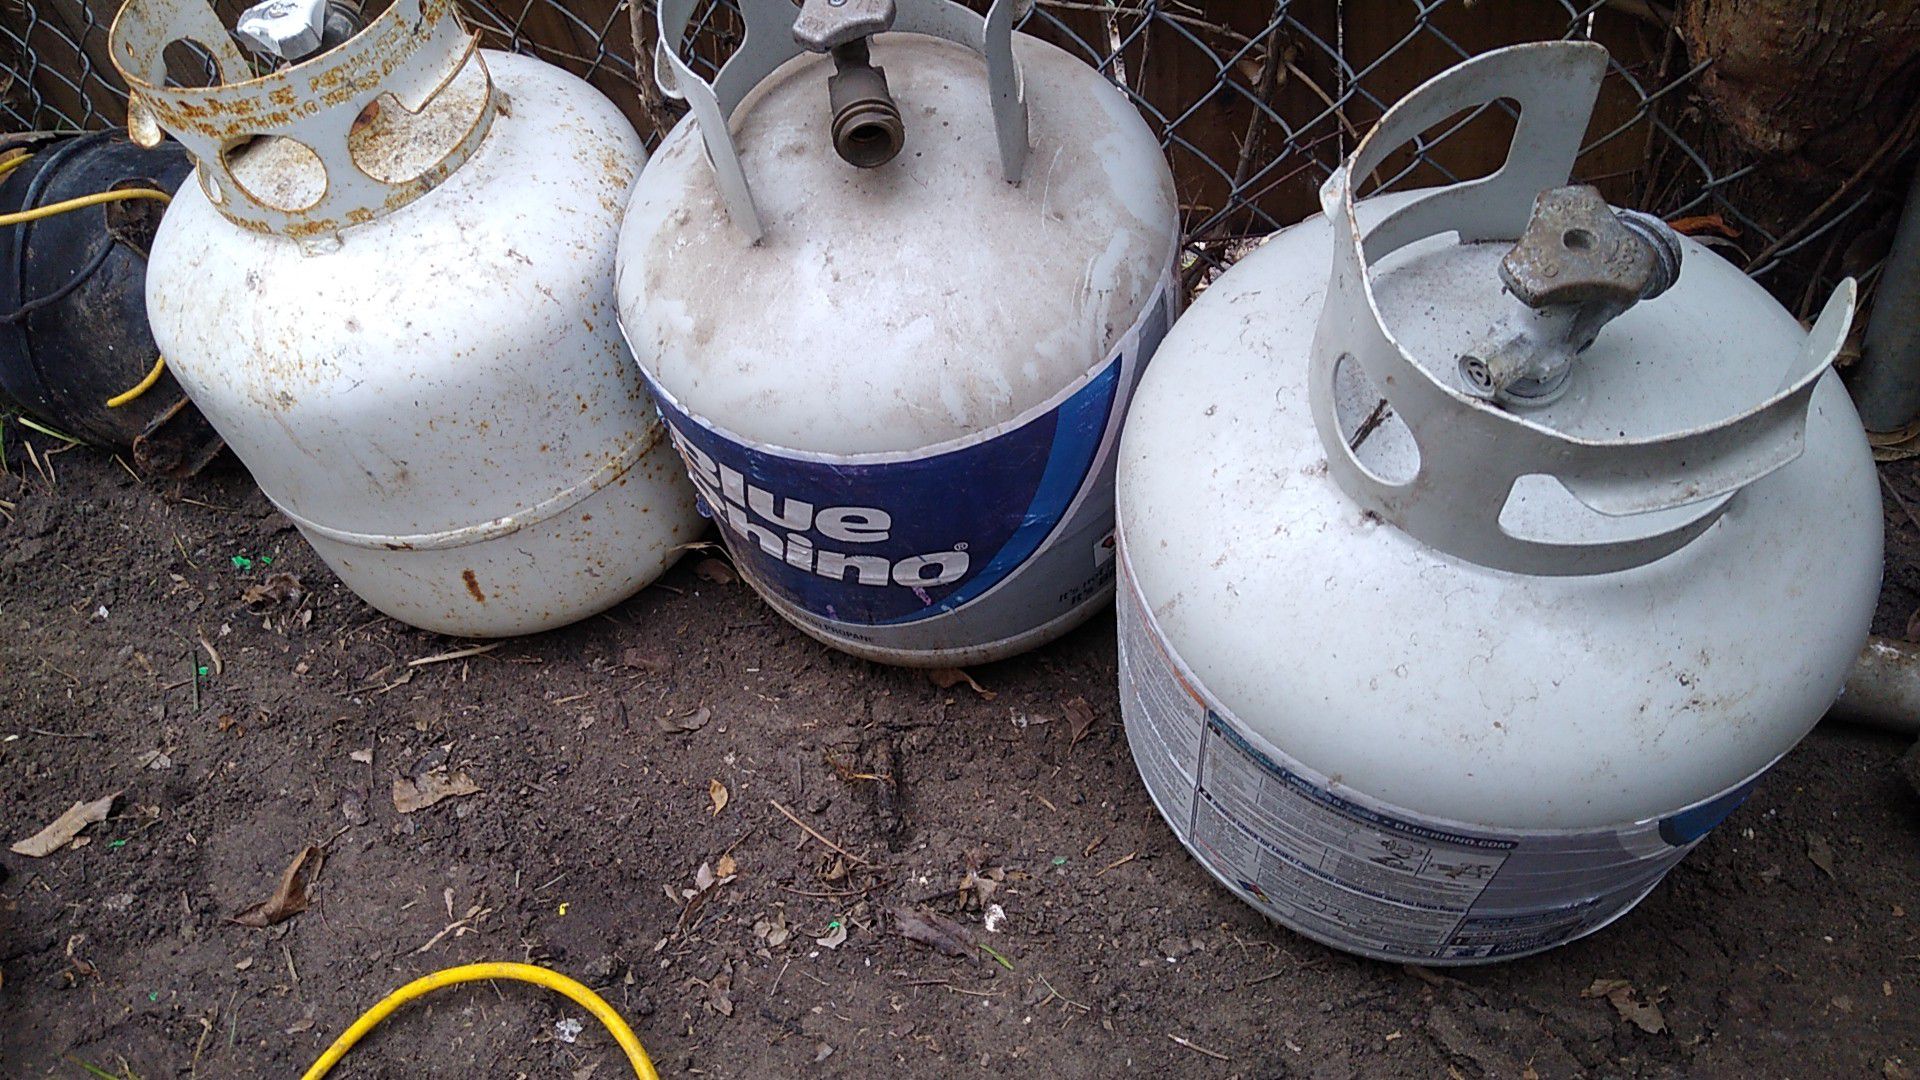 Propane tanks 2 of them for sale